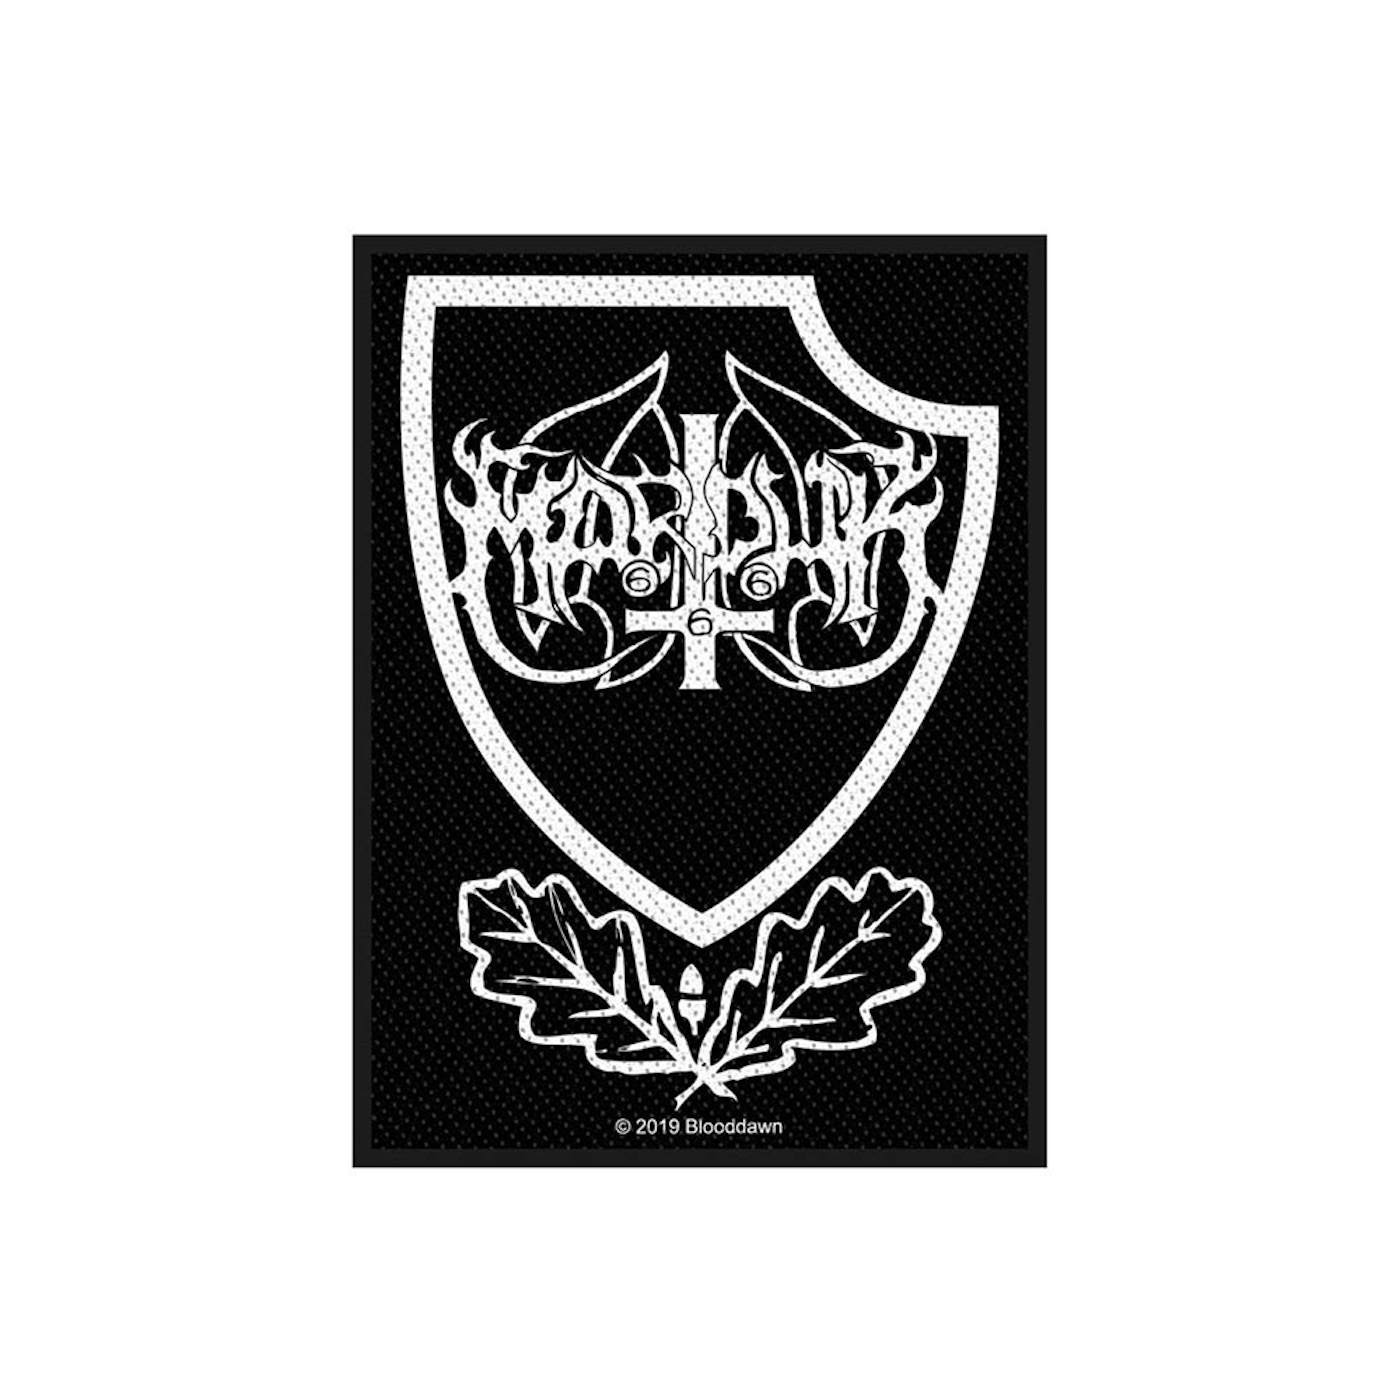 Marduk Sew-On Patch - Panzer Crest (Patch)